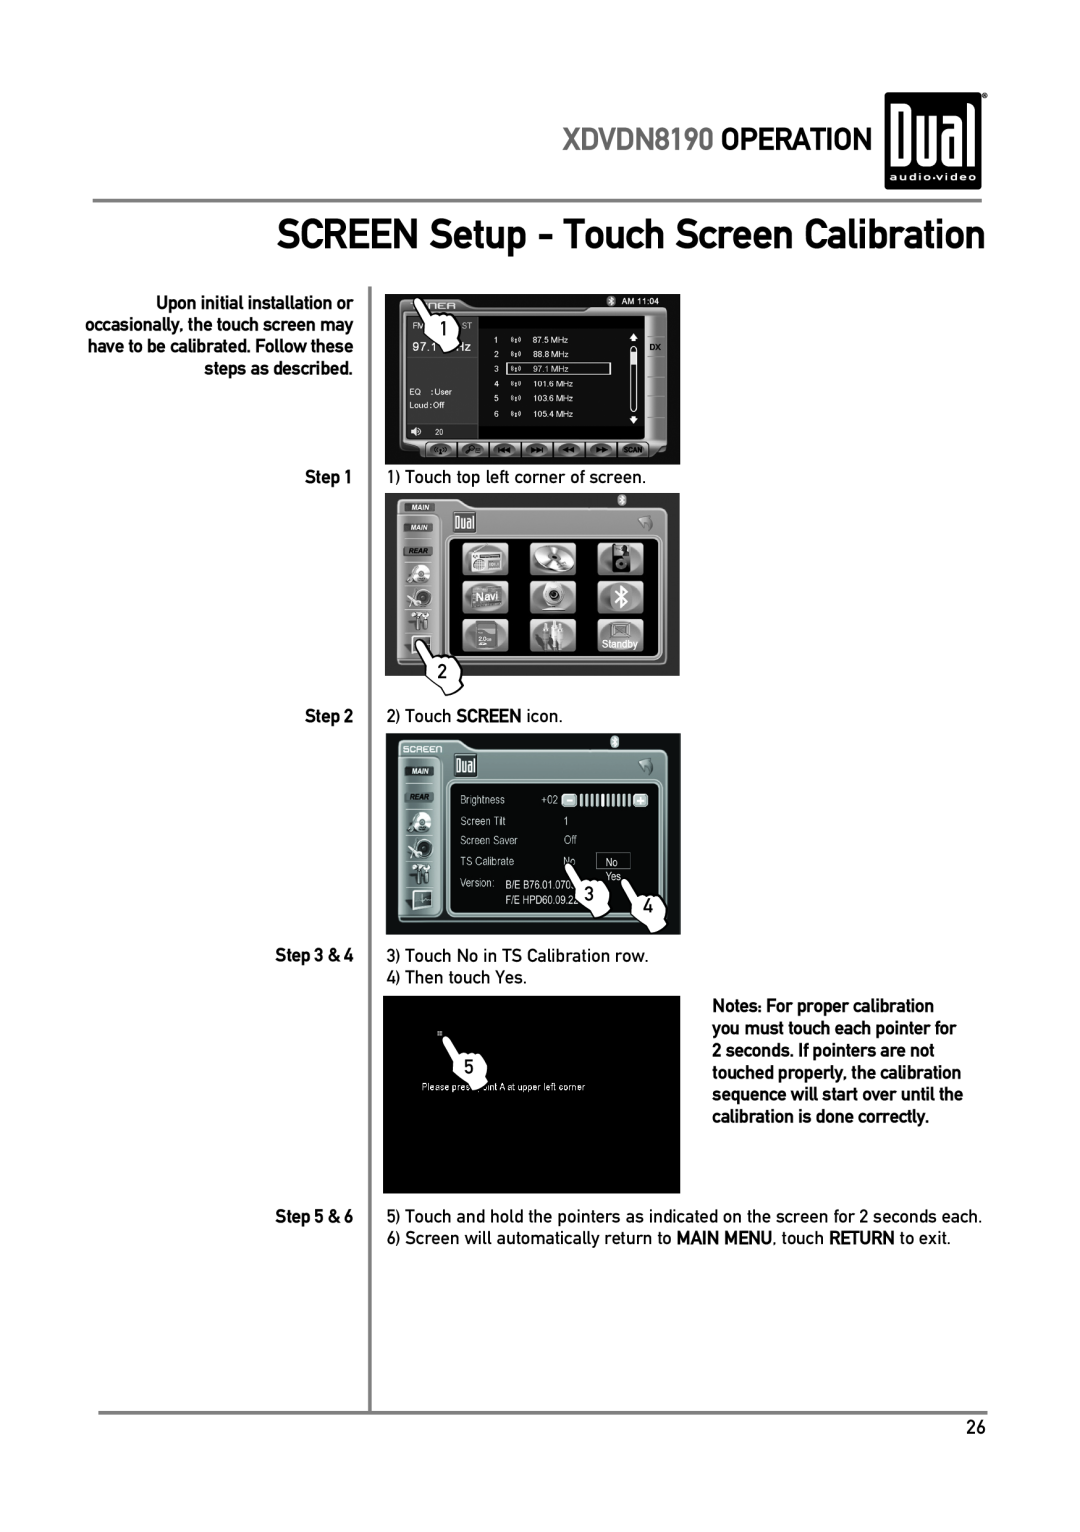 Dual owner manual SCREEN Setup - Touch Screen Calibration, XDVDN8190 OPERATION, Step 